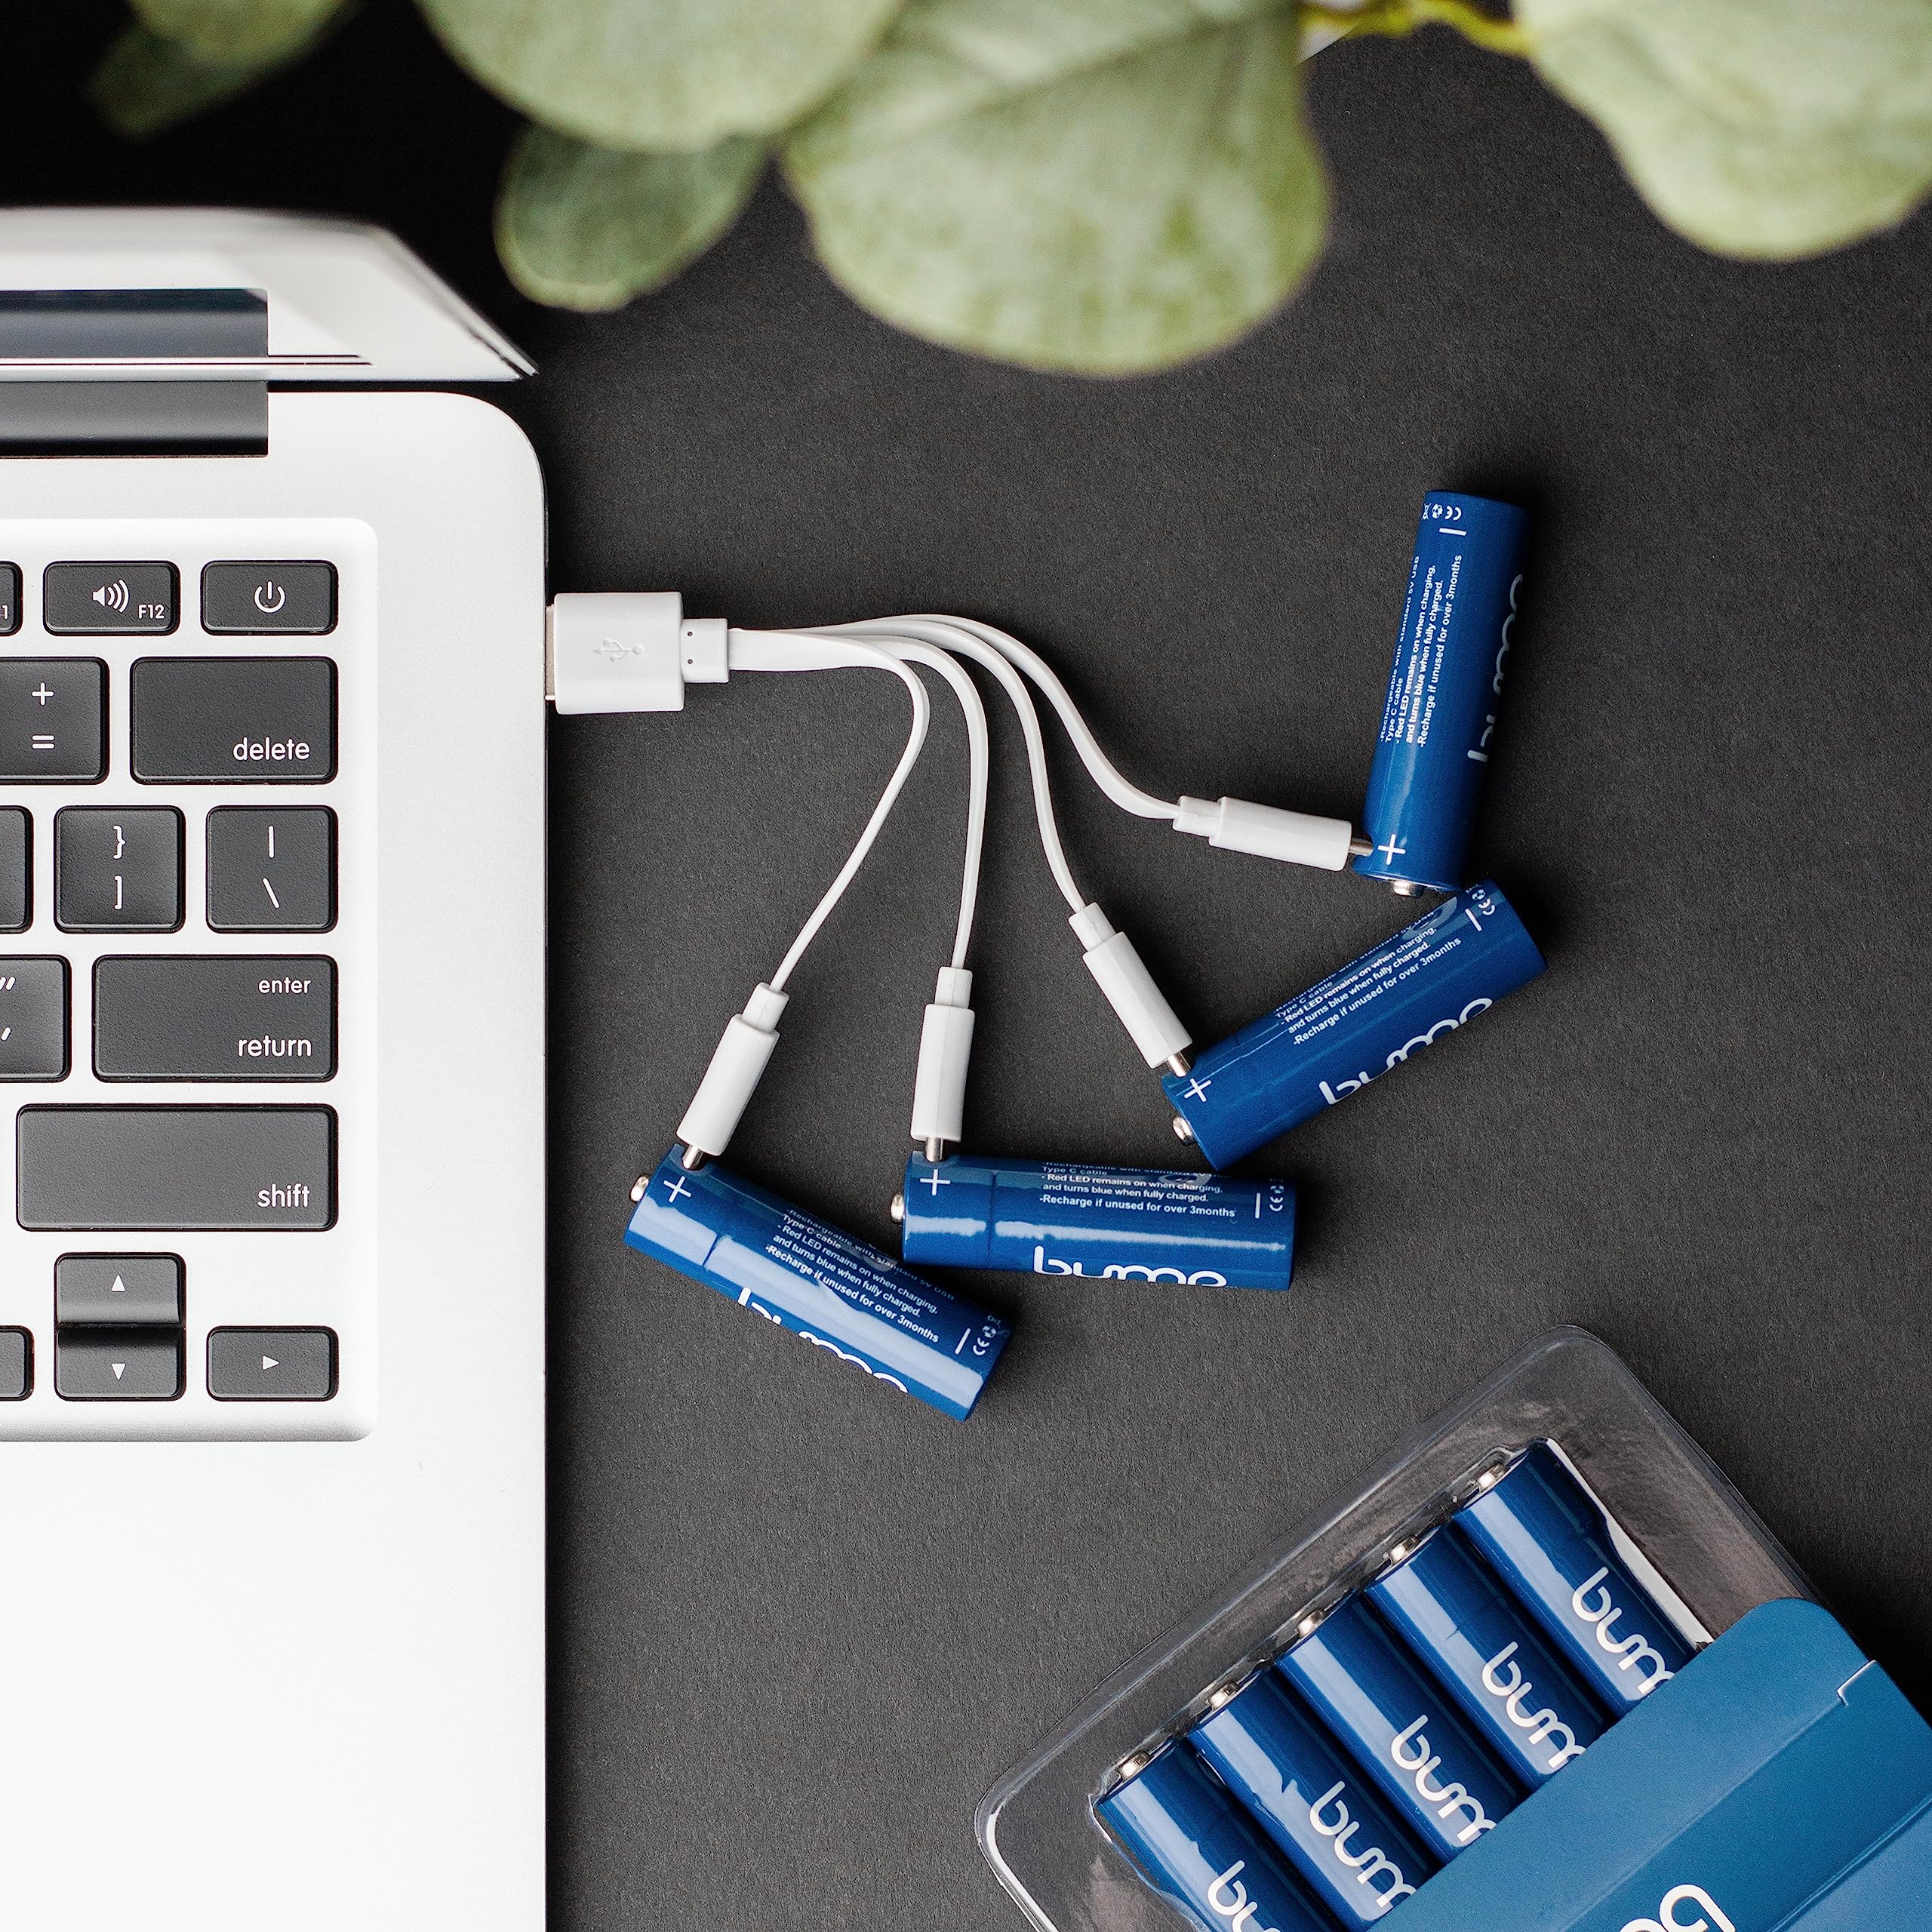 BUMP AA + AAA USB-C Rechargeable NiMH Batteries Bundle -10 Pack of Each - Sustainable & Cost-Effective Alternative to Lithium Ion - Fast Charging, Long-Lasting Power - Three Charger Cables Included